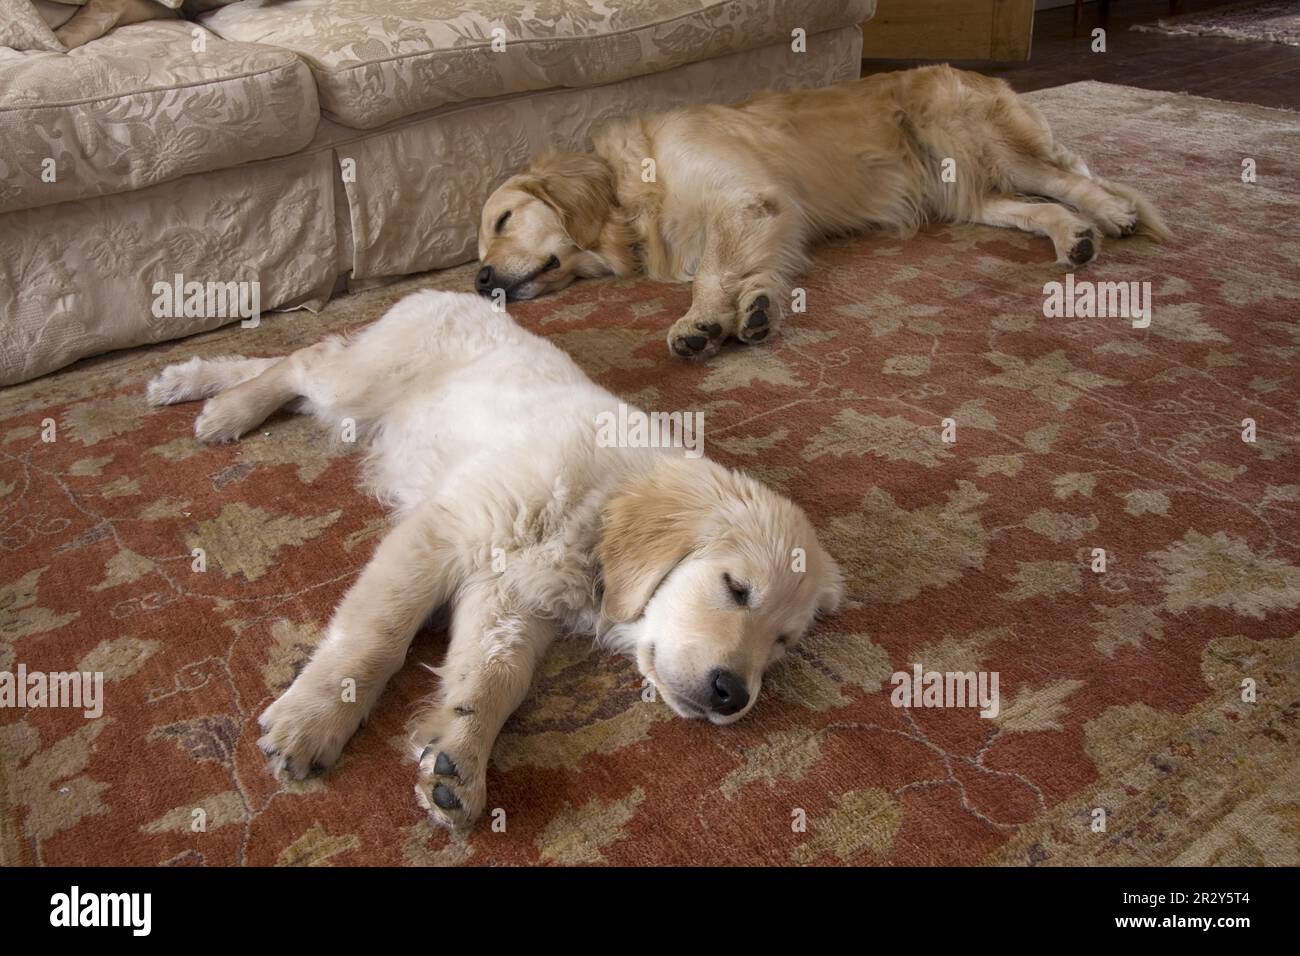 Domestic Dog, Golden Retriever, adult and puppy, sleeping, laying on rug in lounge, England, United Kingdom Stock Photo